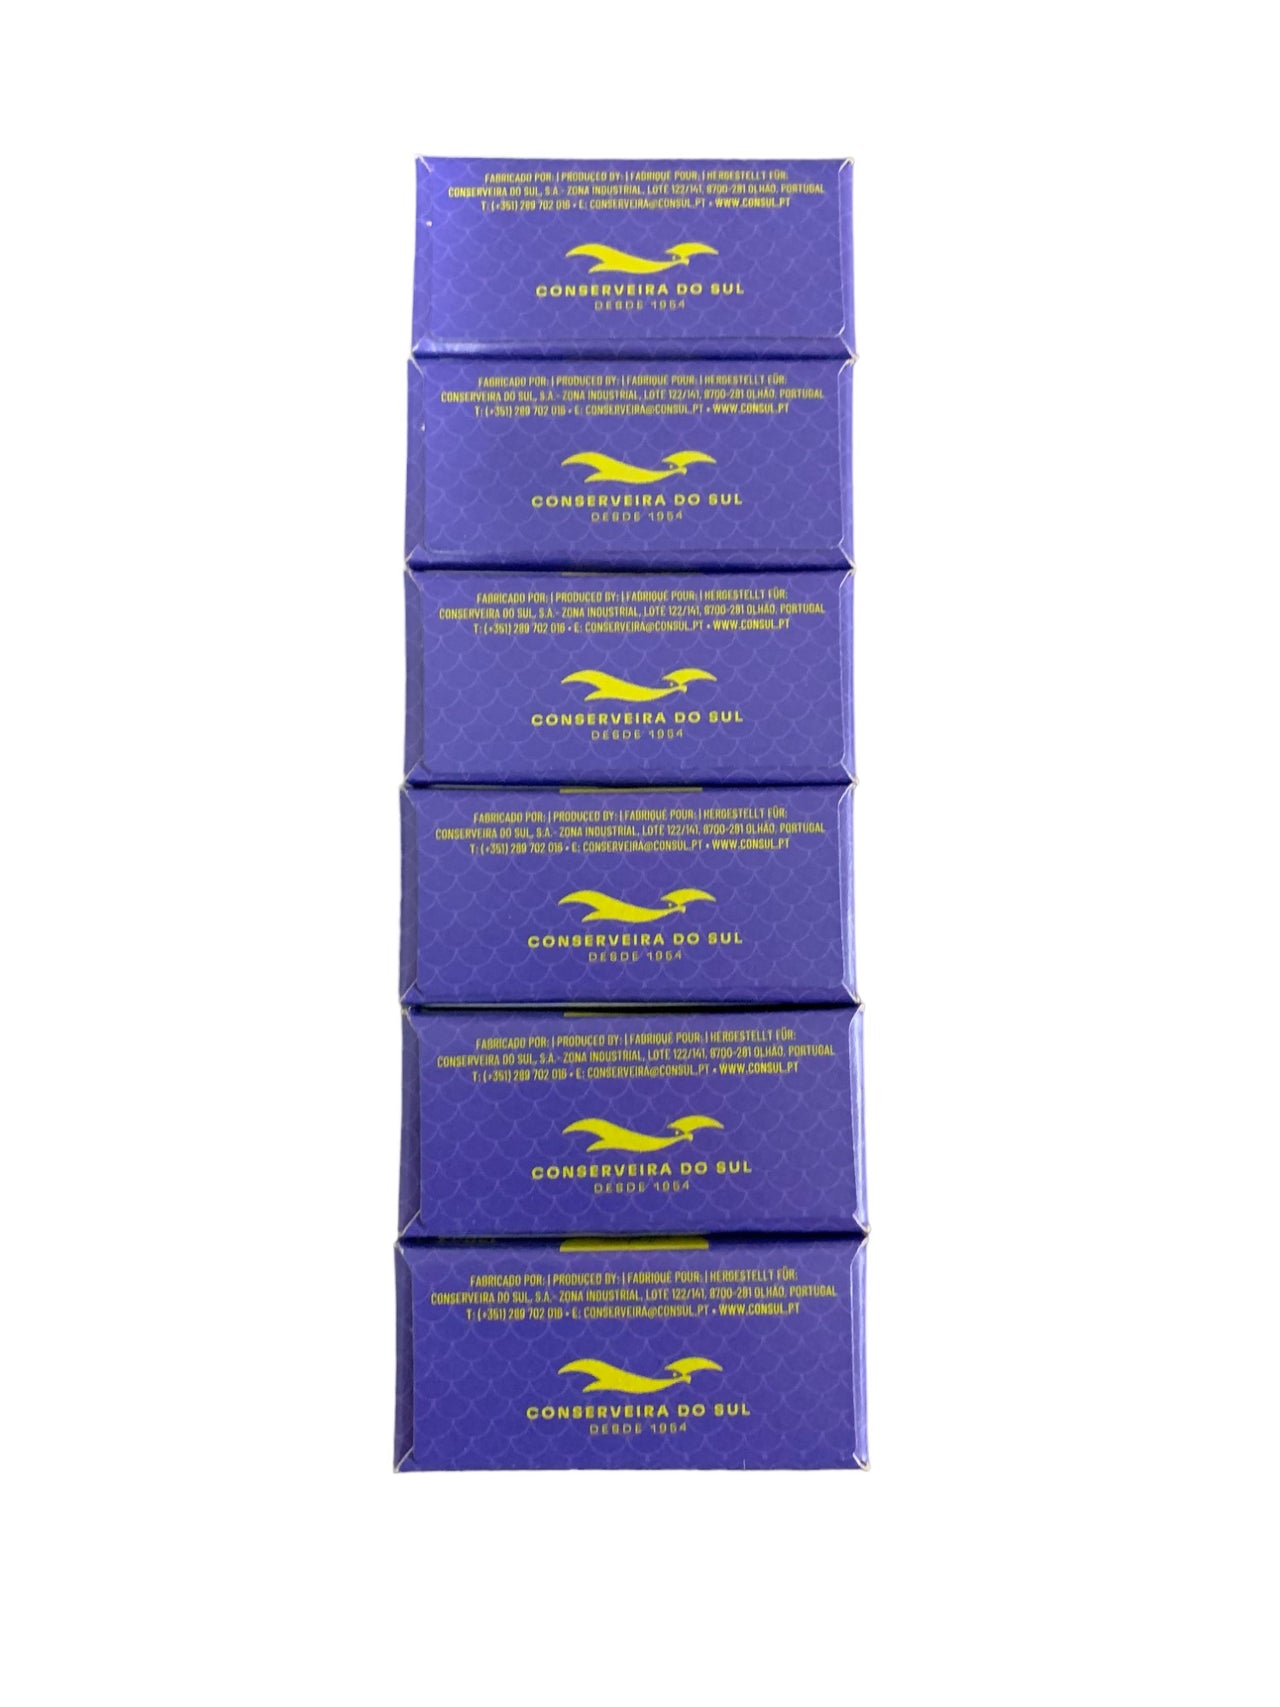 Manná Sardines in Extra Virgin Olive Oil with Lemon - 6 Pack - TinCanFish